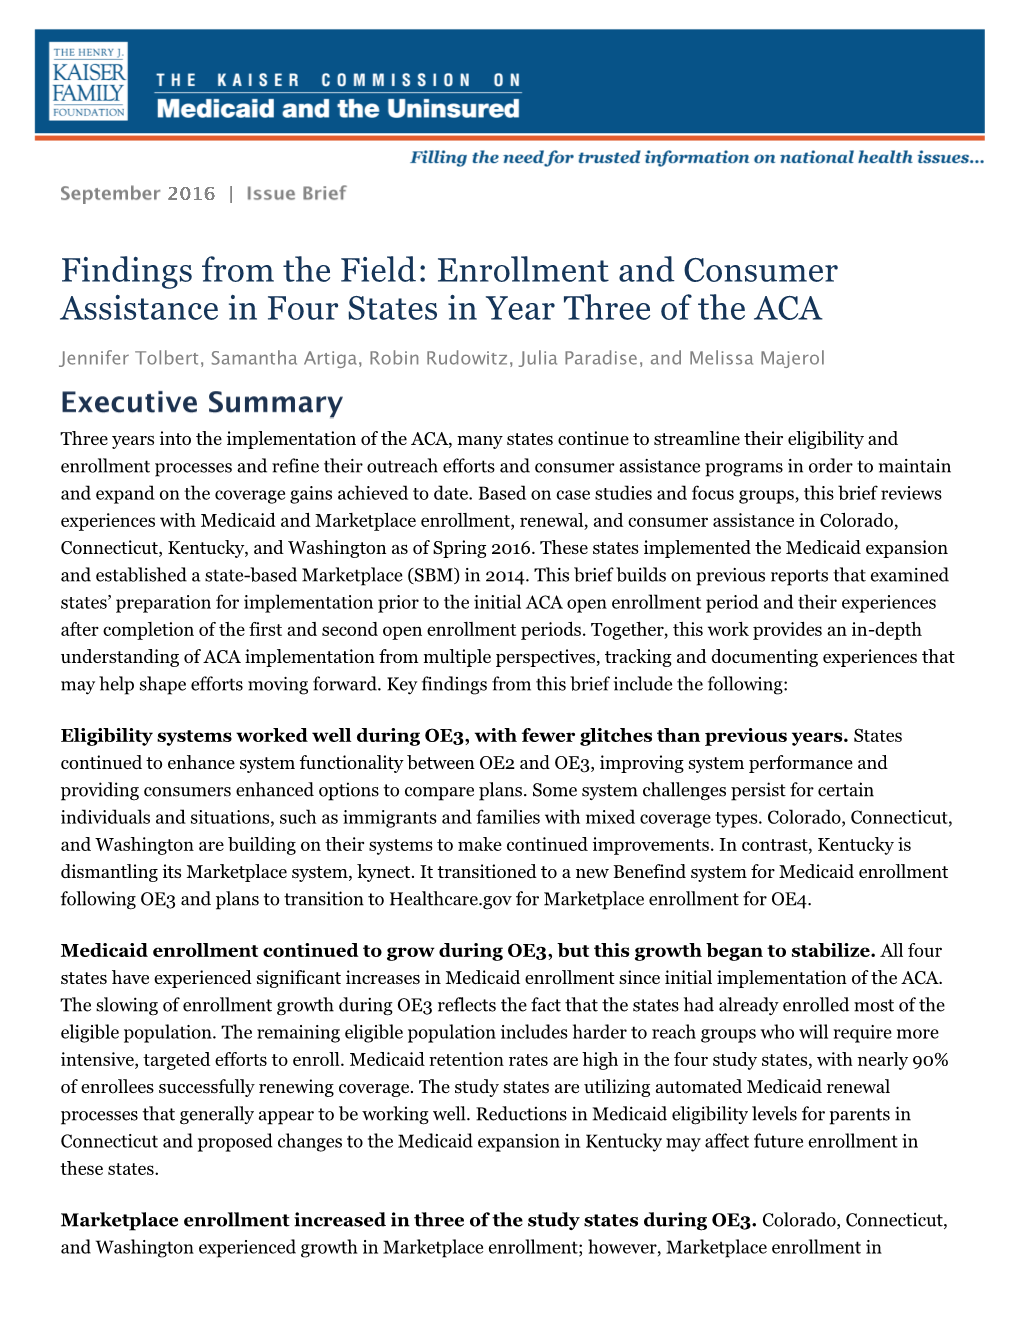 Enrollment and Consumer Assistance in Four States in Year Three of the ACA